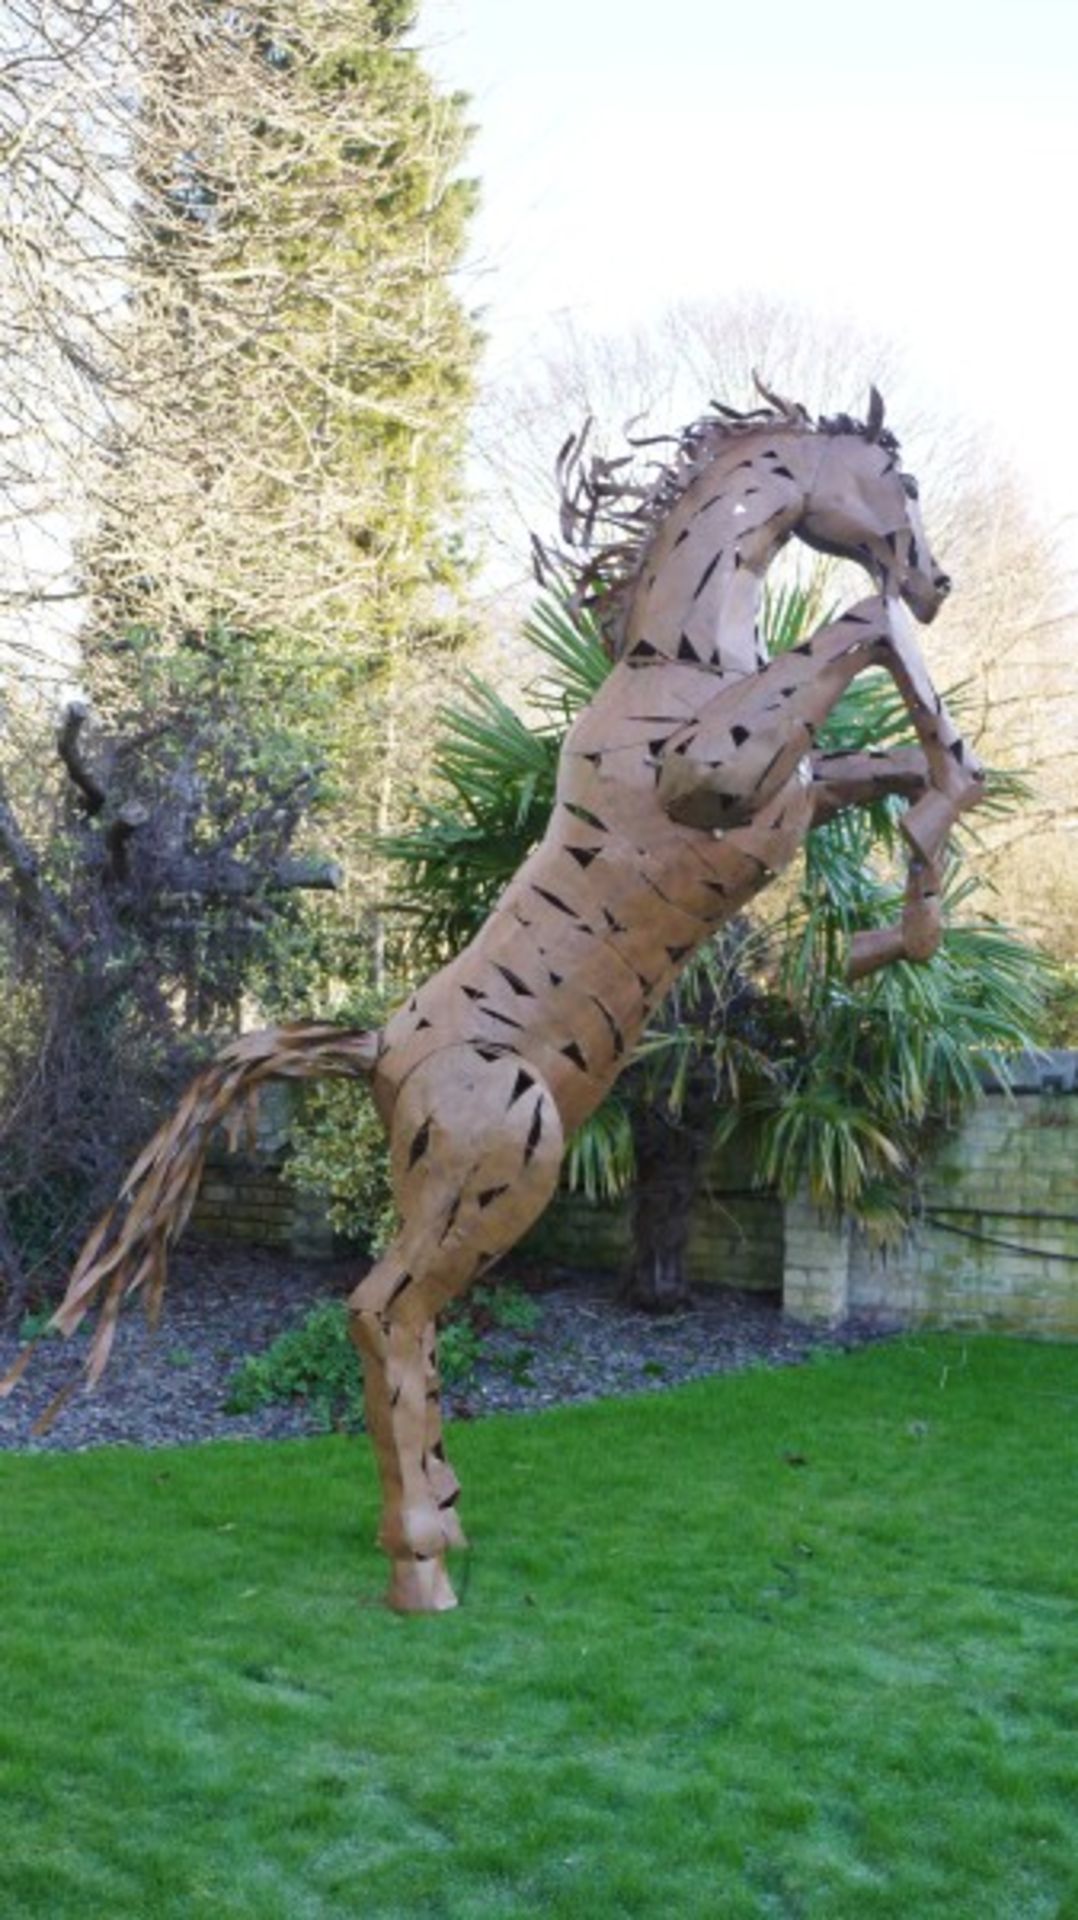 VERY RARE METAL REARING HORSE STATUE - 11 FEET HIGH ! - Image 6 of 7